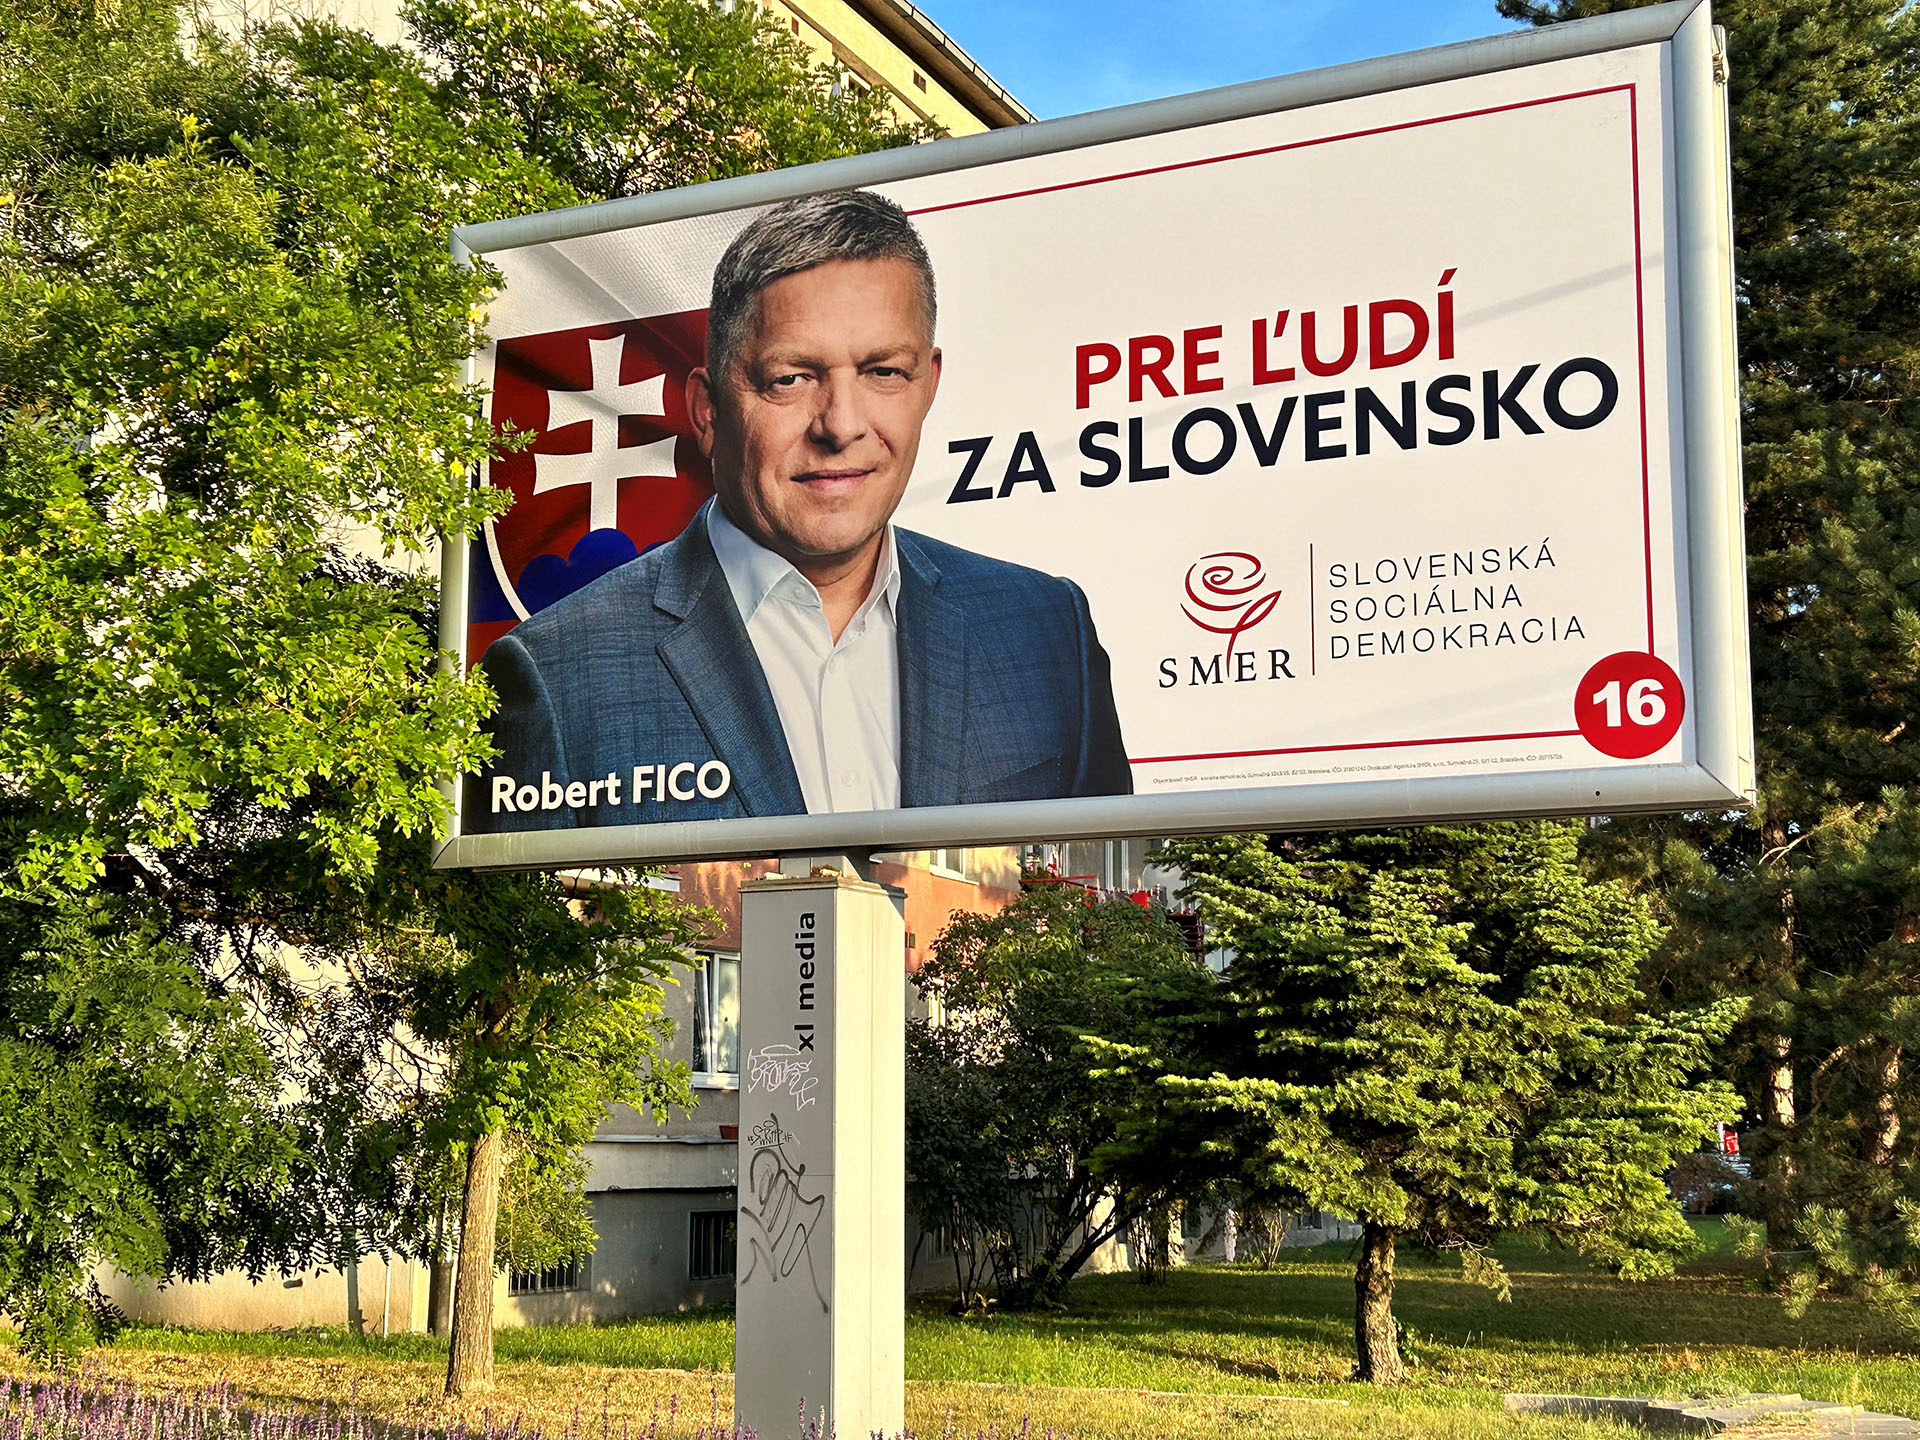 The face of Robert Fico on a billboard in Slovakia